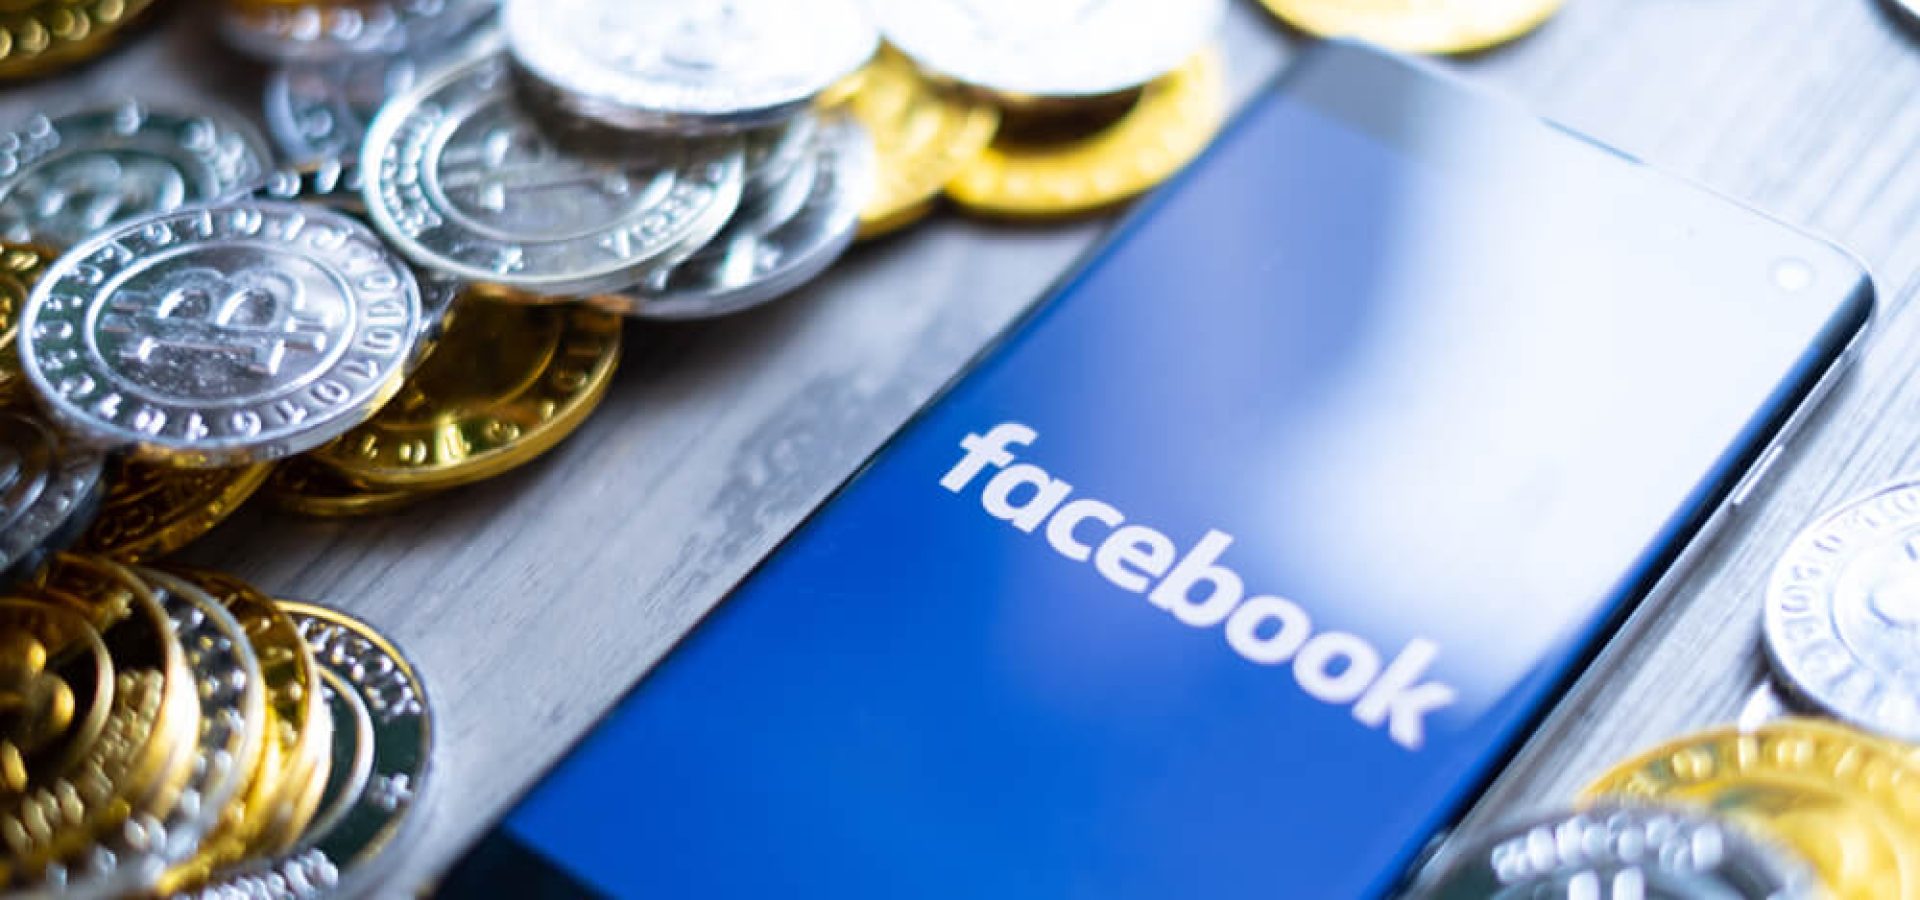 Reserve Bank of Australia: Facebook with crypto coins.